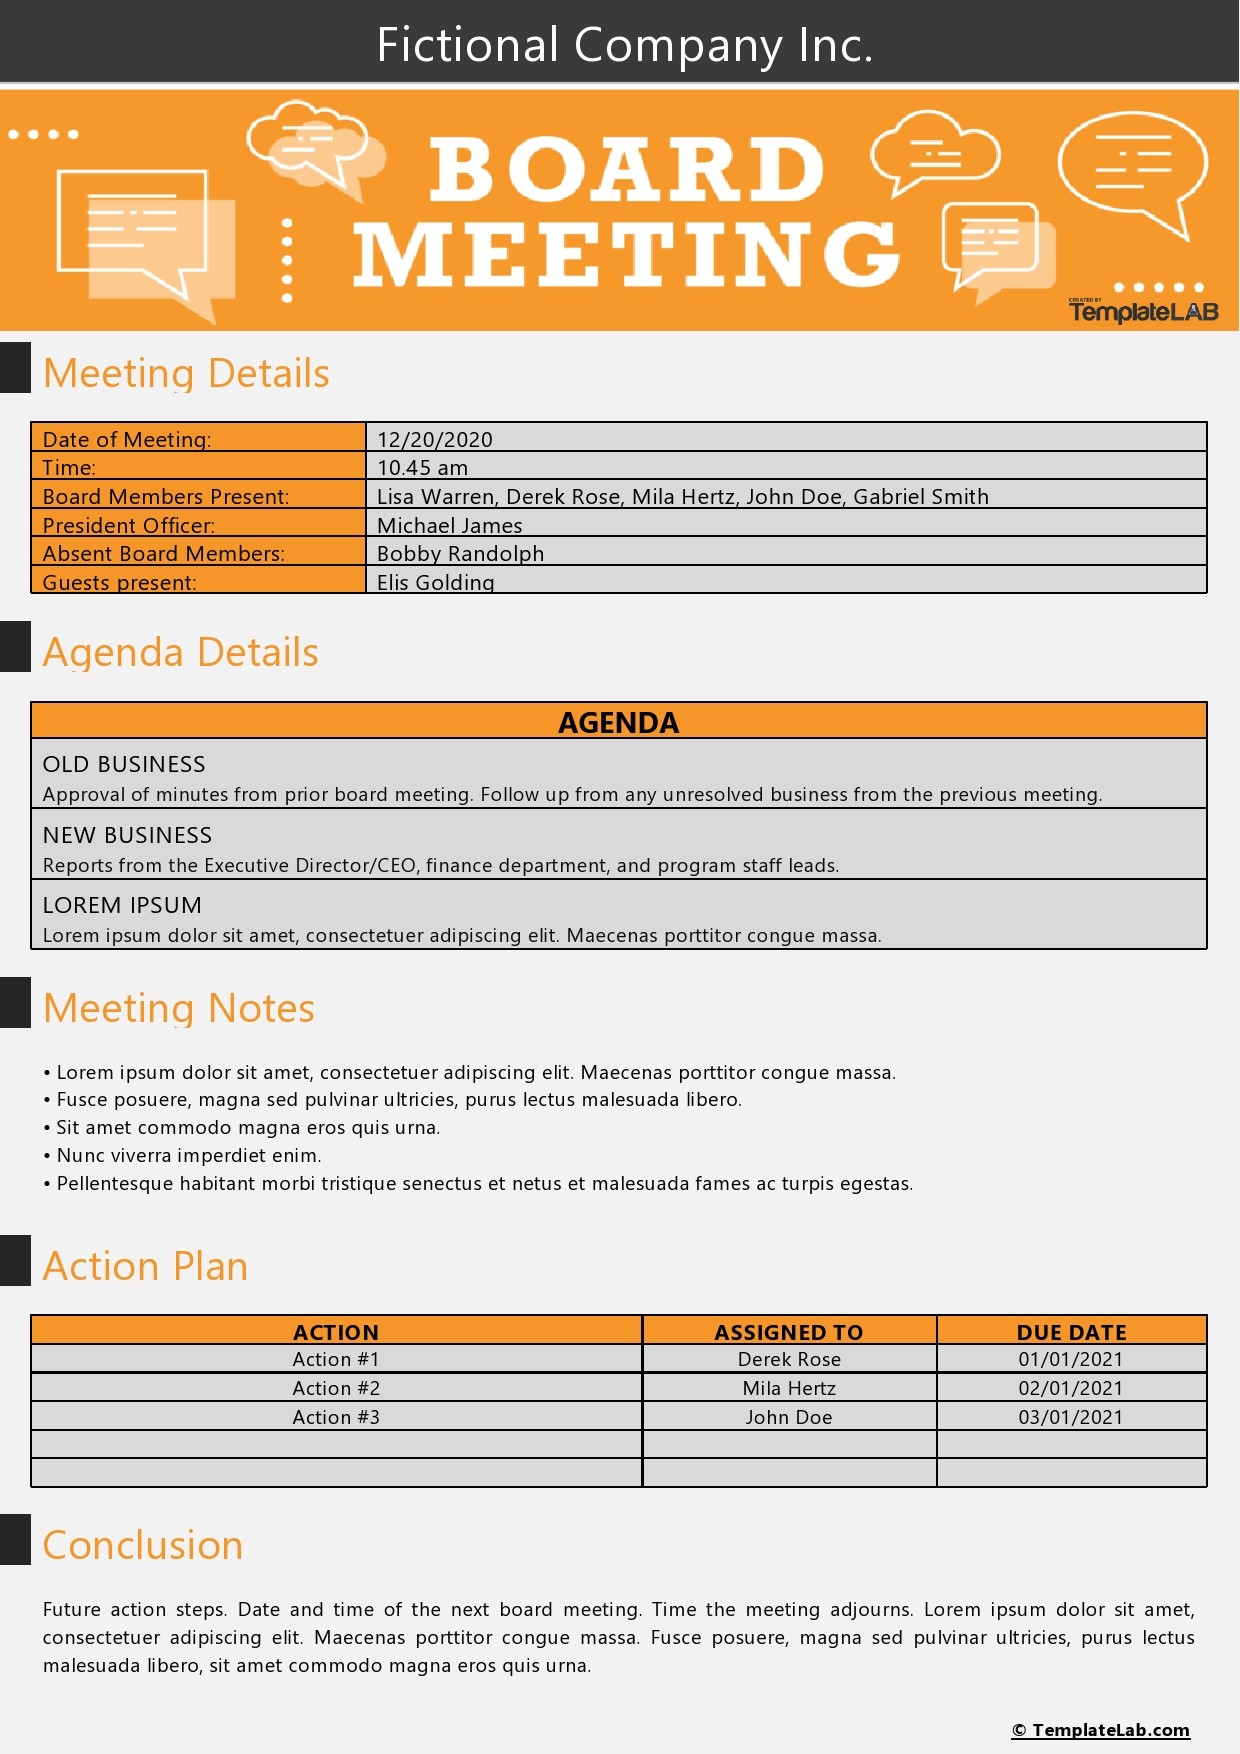 23 Handy Meeting Minutes & Meeting Notes Templates